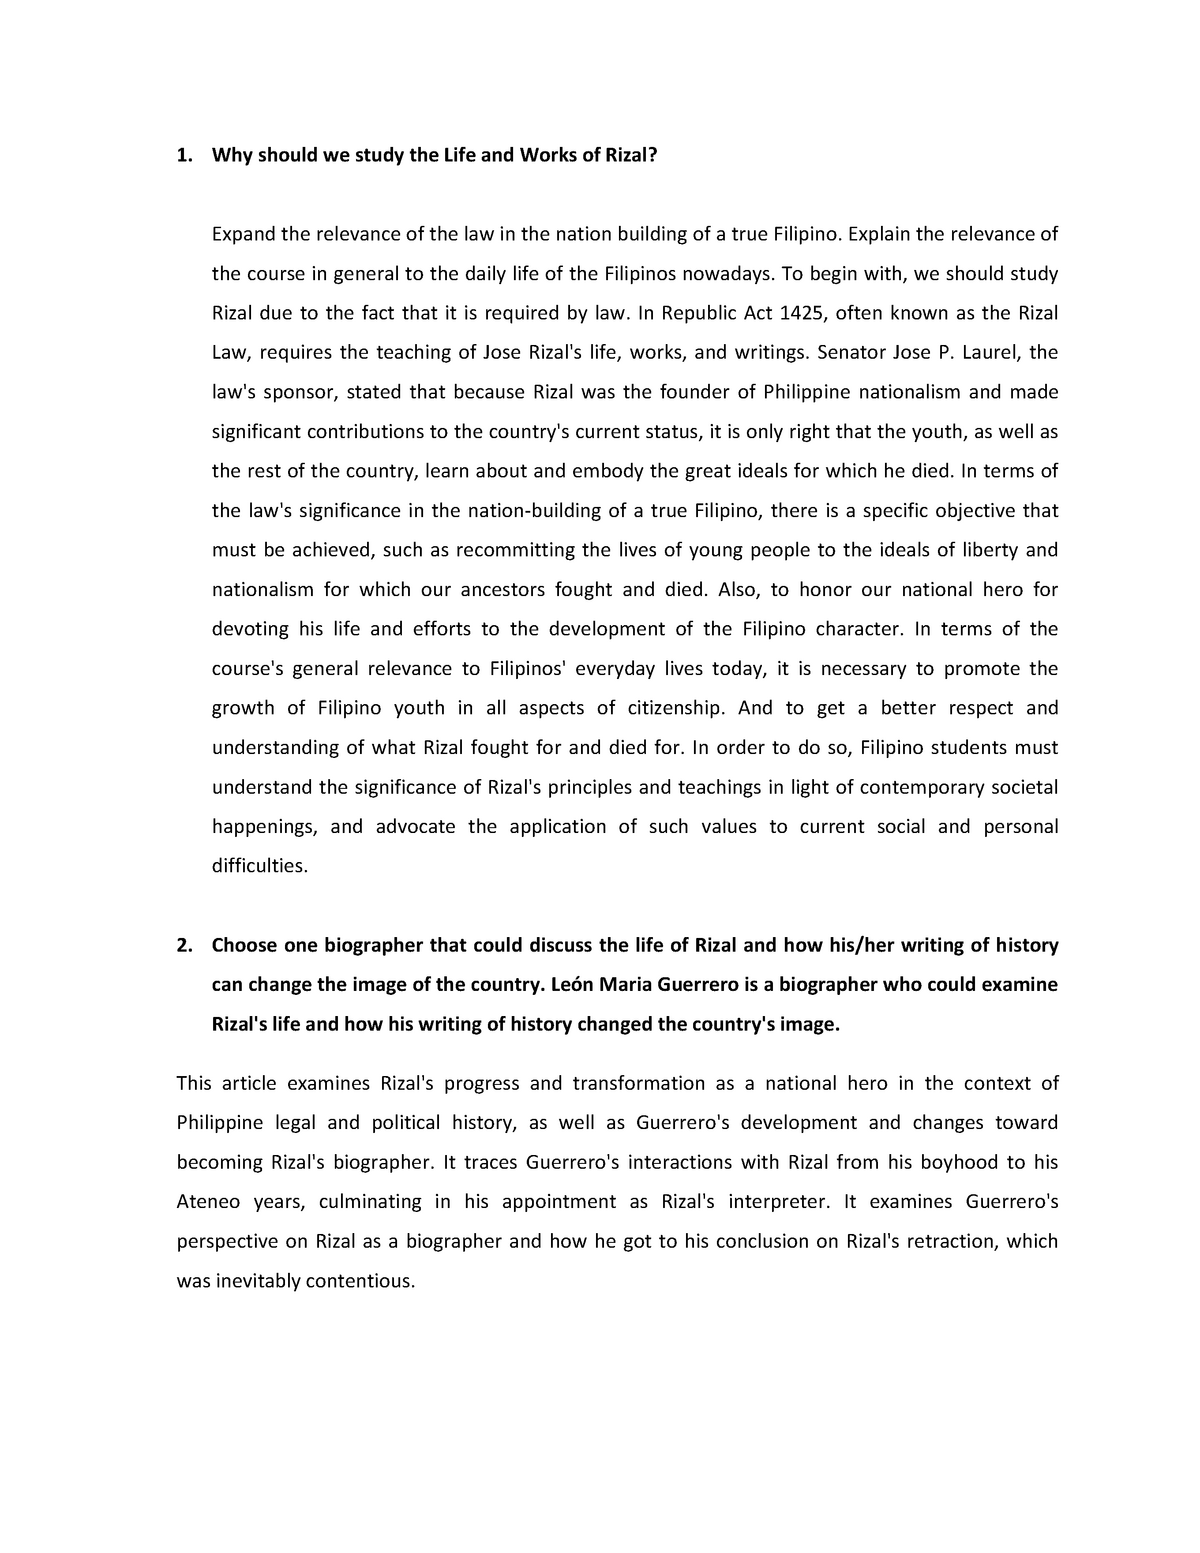 paragraph personal essay on the relevance of the rizal course